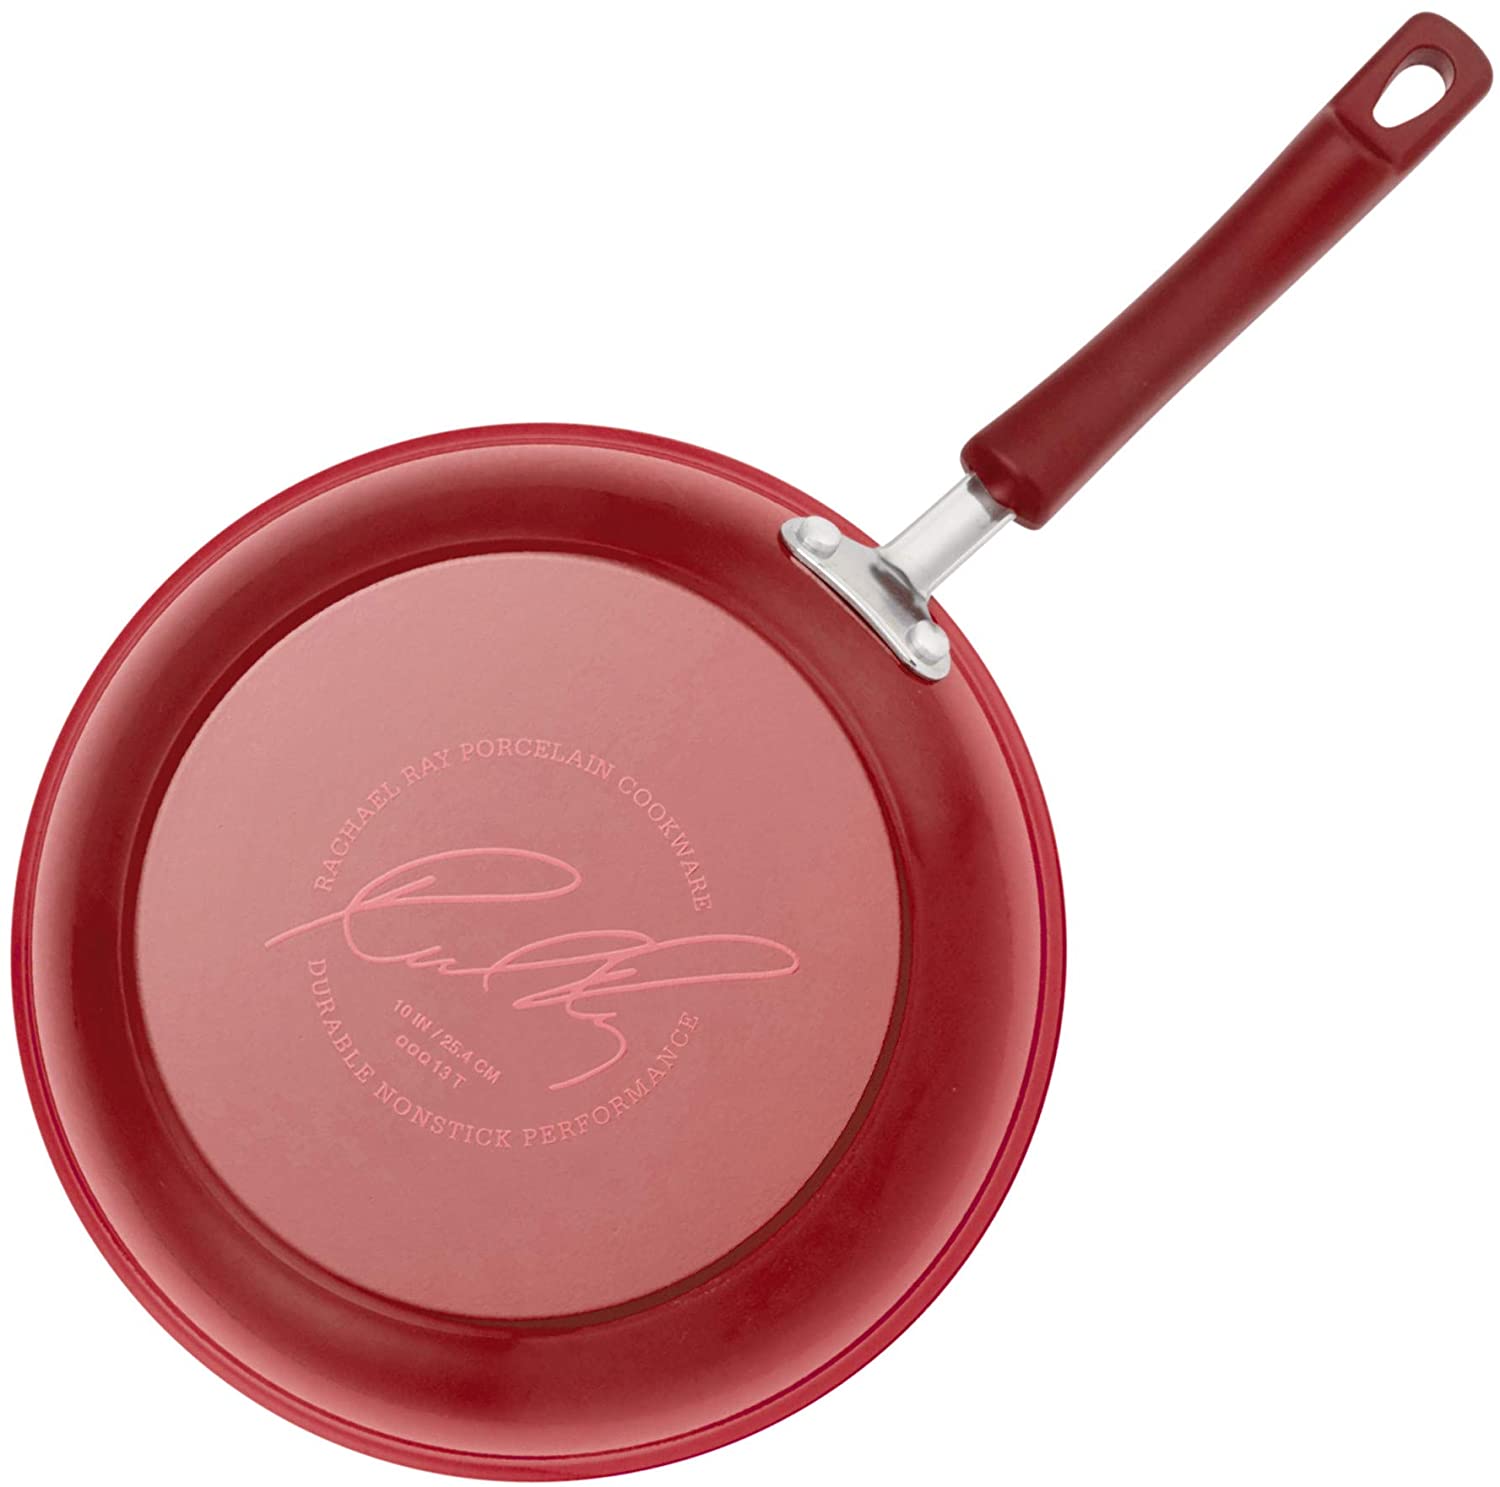 Rachael Ray Create Delicious Nonstick Deep Frying Pans - Red, 2 pc - Baker's